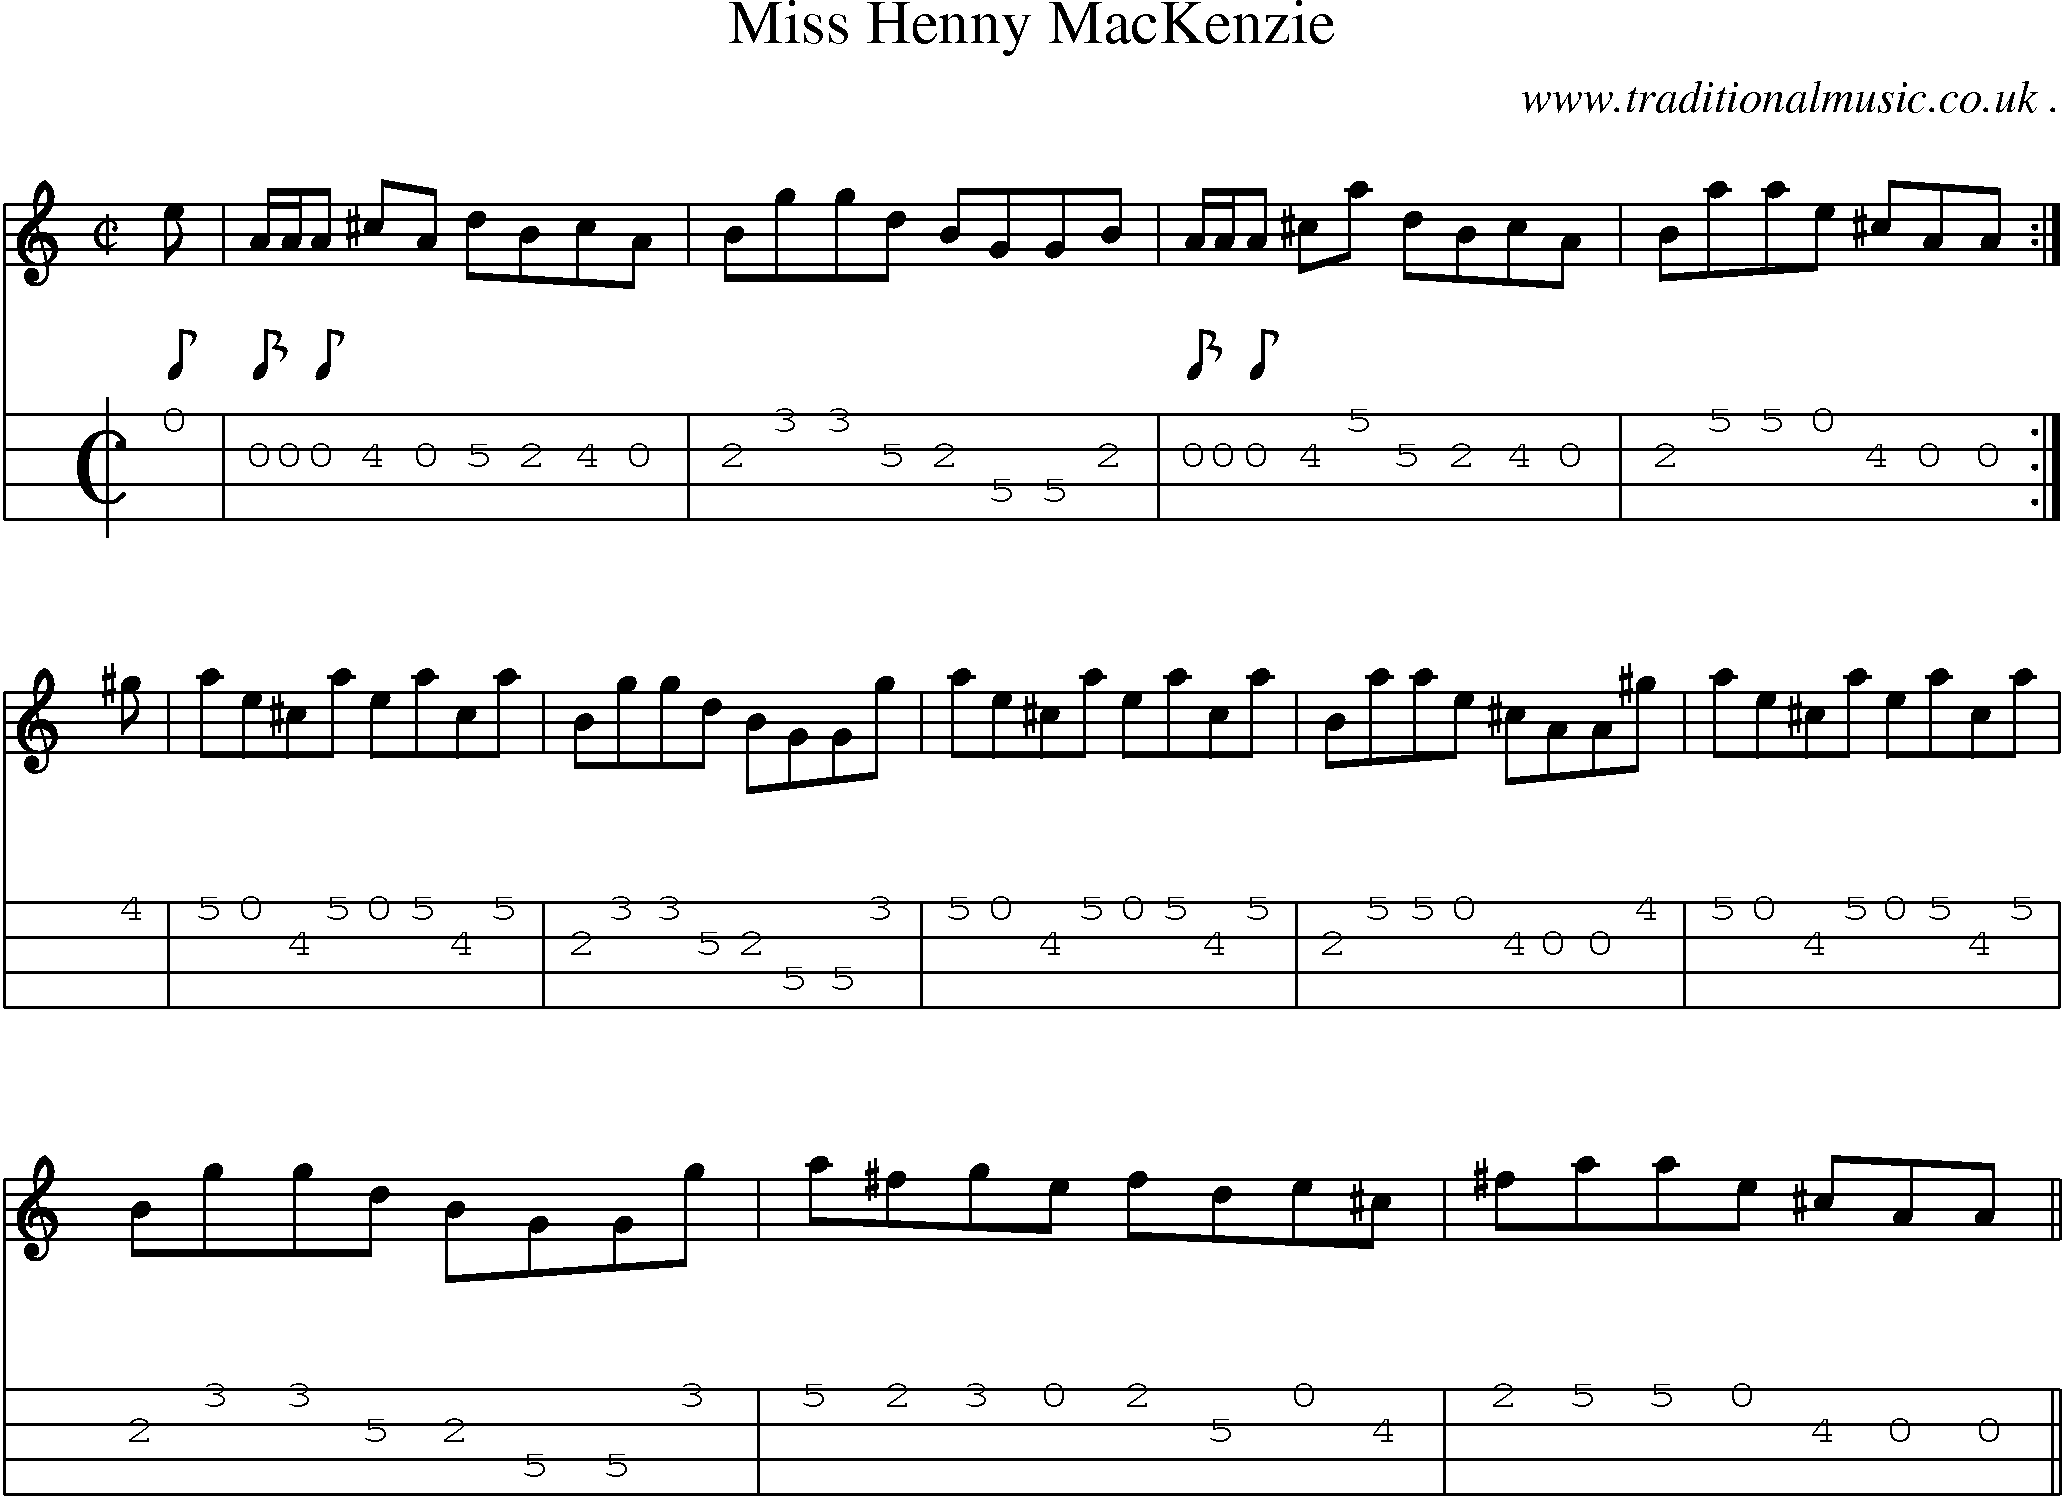 Sheet-music  score, Chords and Mandolin Tabs for Miss Henny Mackenzie